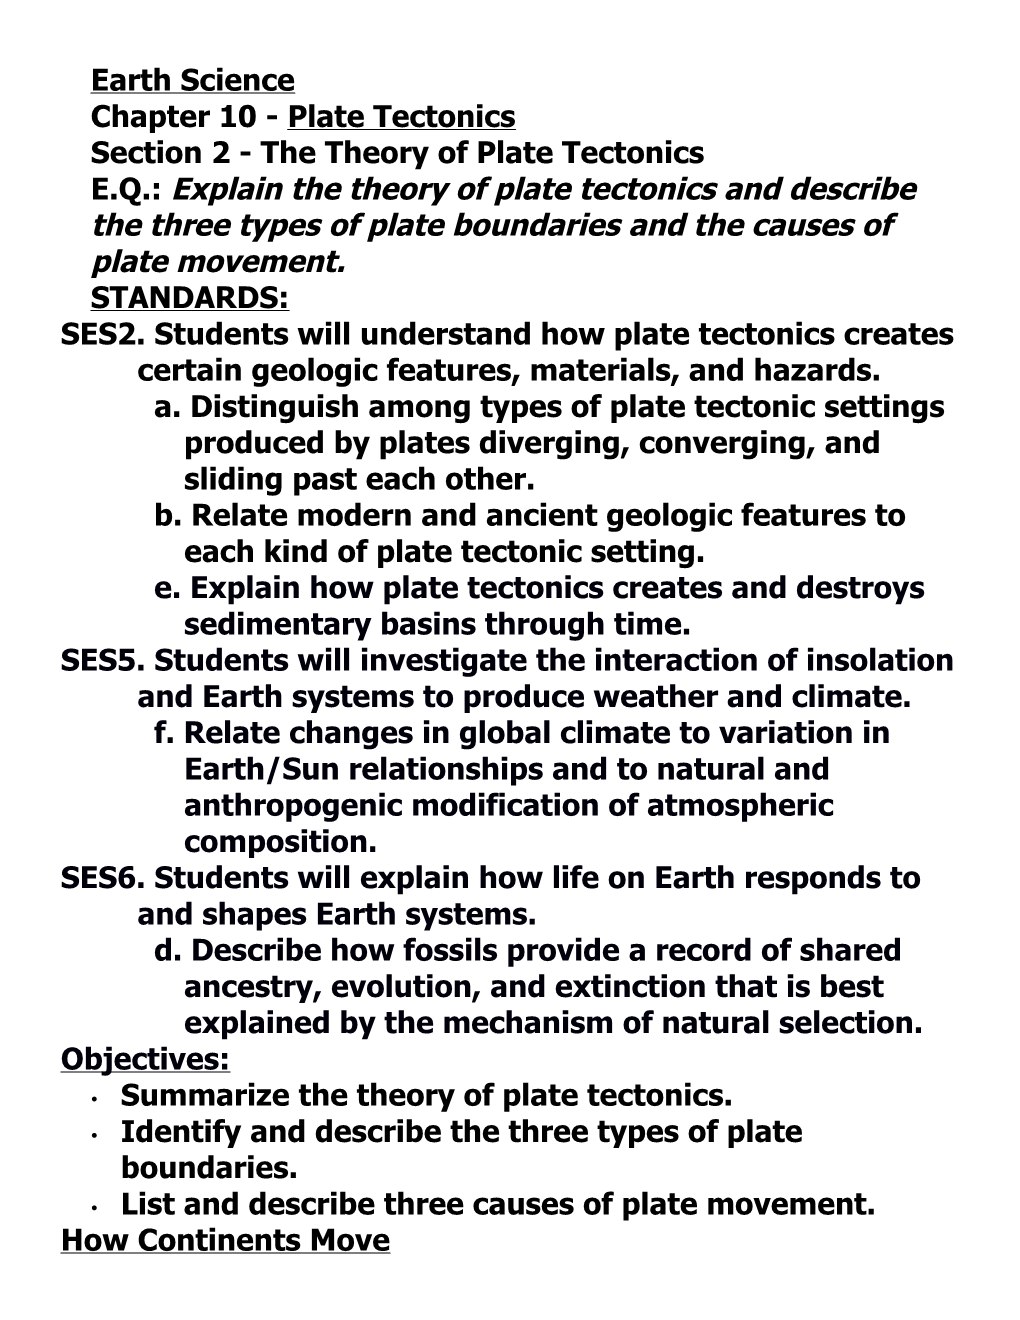 Section 2 - the Theory of Plate Tectonics